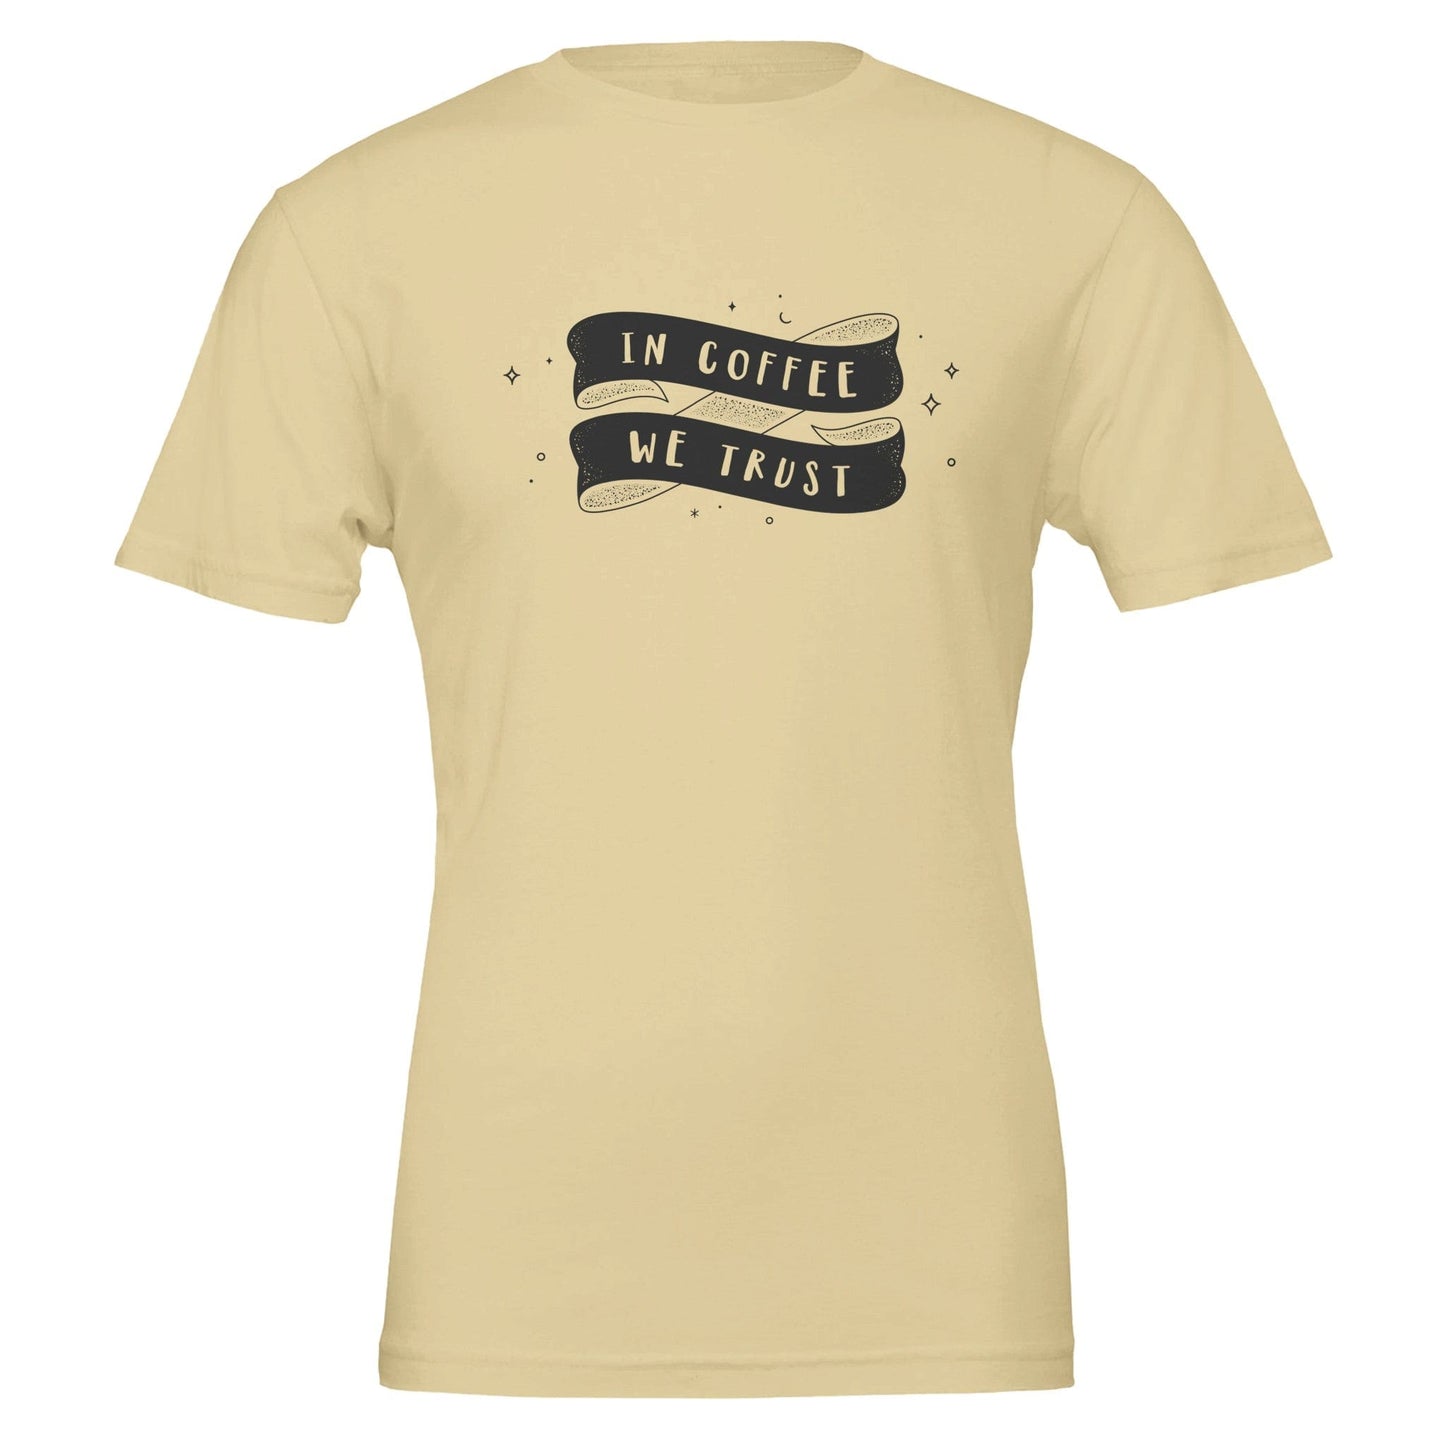 Good Bean Gifts "In Coffee We Trust" Unisex Crewneck T-shirt | Bella + Canvas 3001 Natural / S